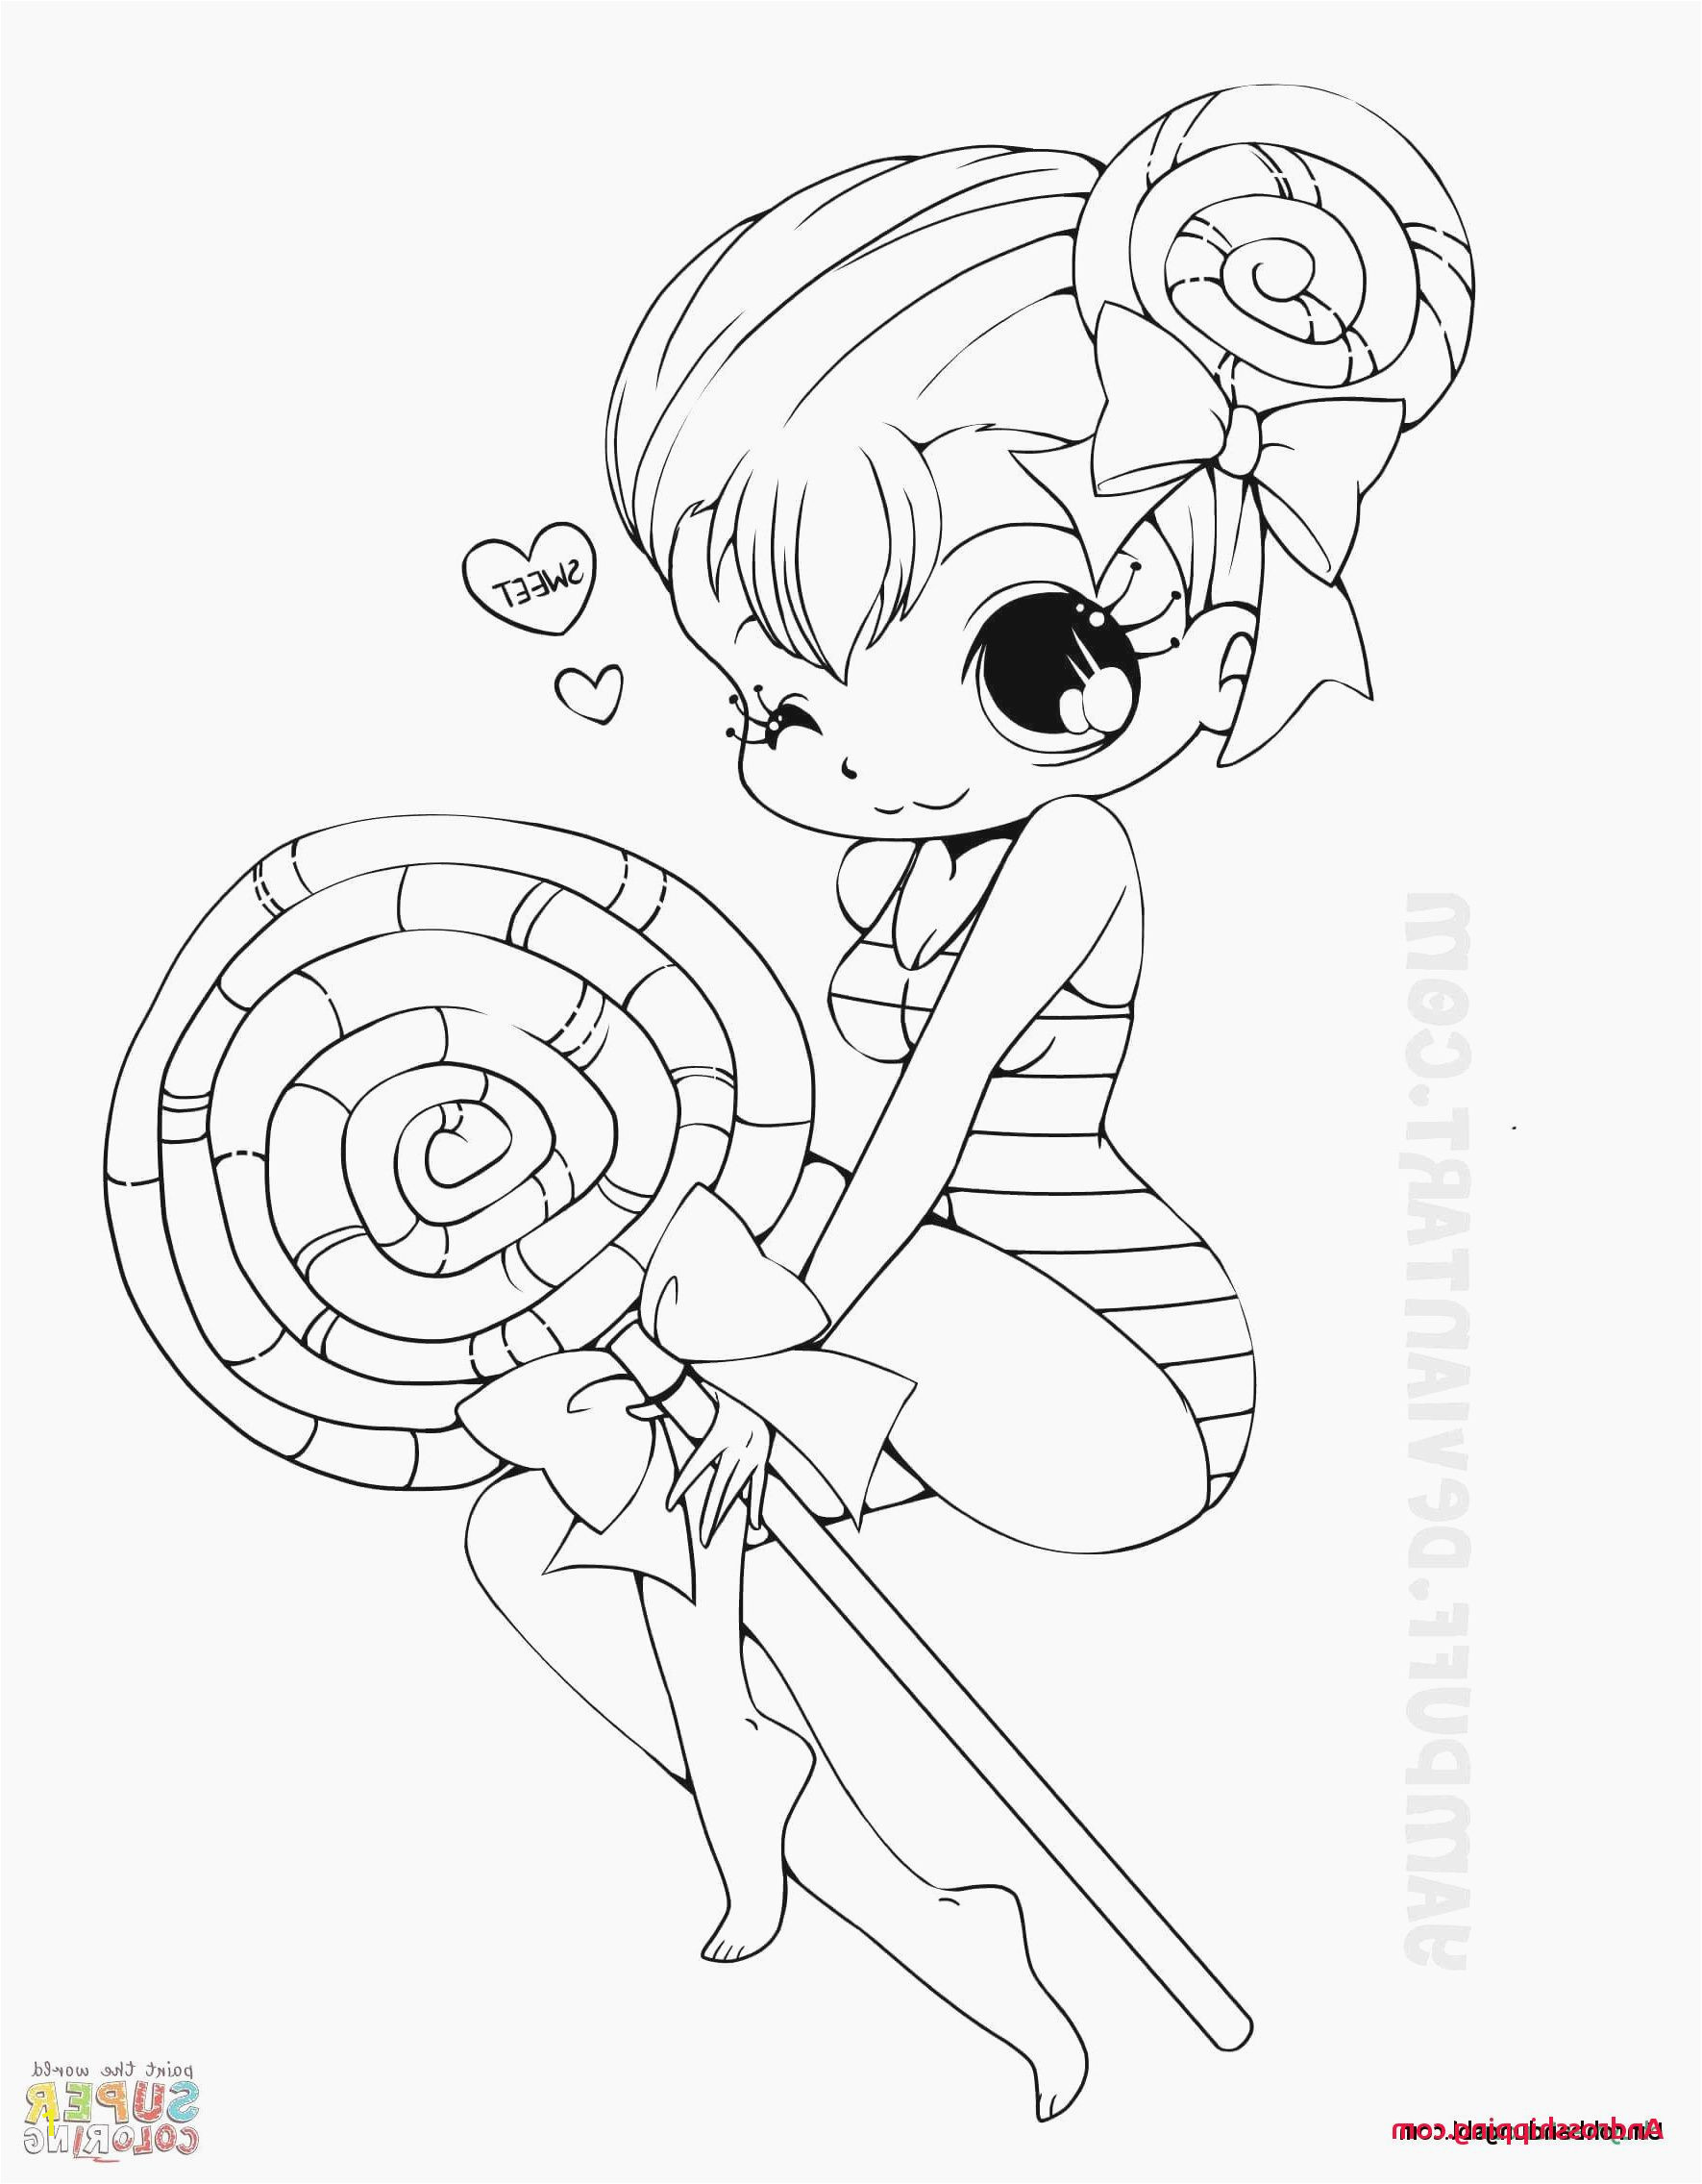 Crayola Coloring Pages Adults Girl Face Coloring Page Witch Coloring Page Inspirational